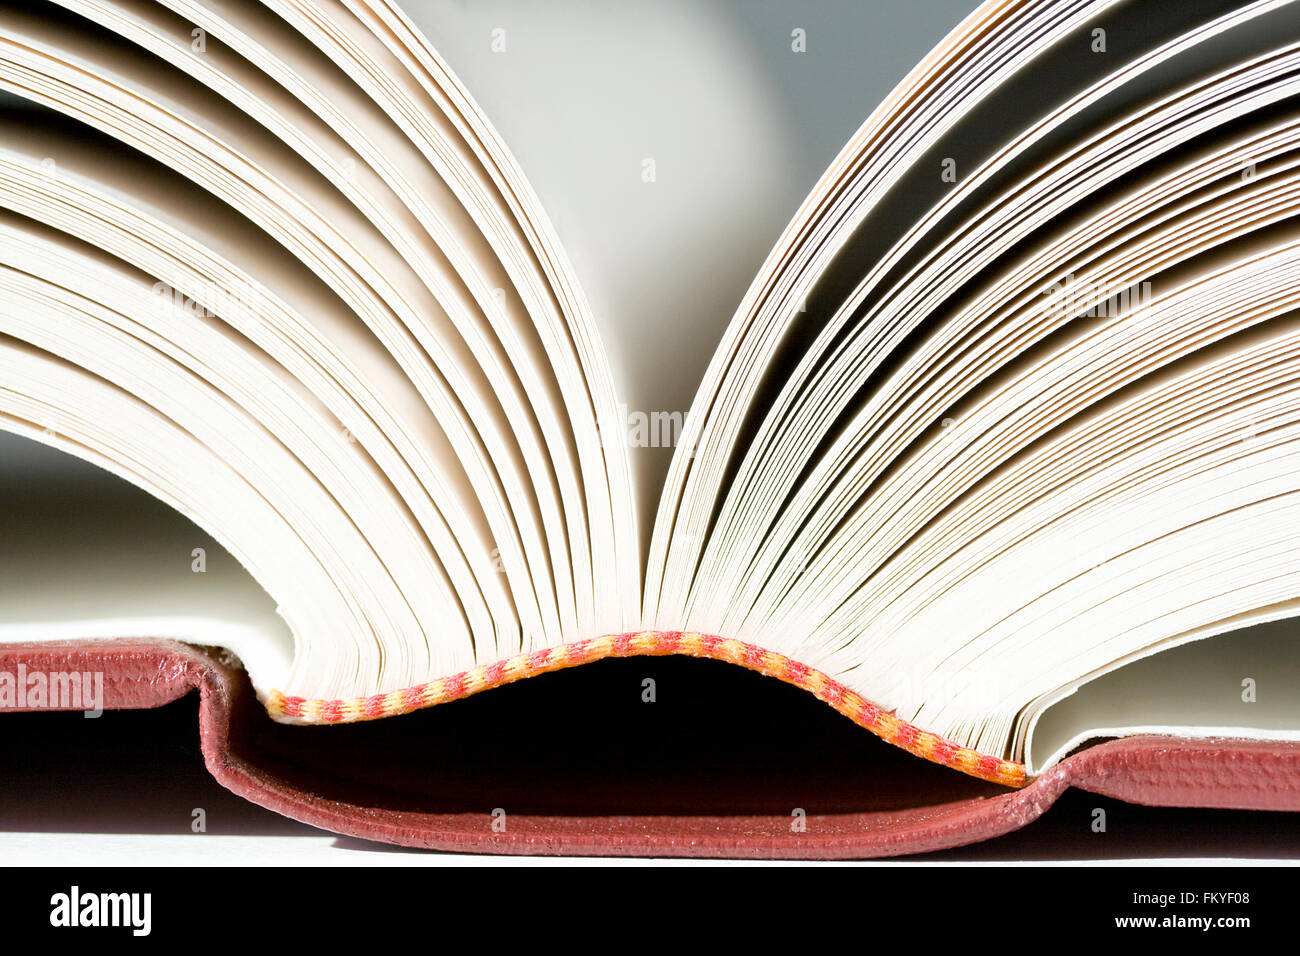 Close up of spine of open book Stock Photo